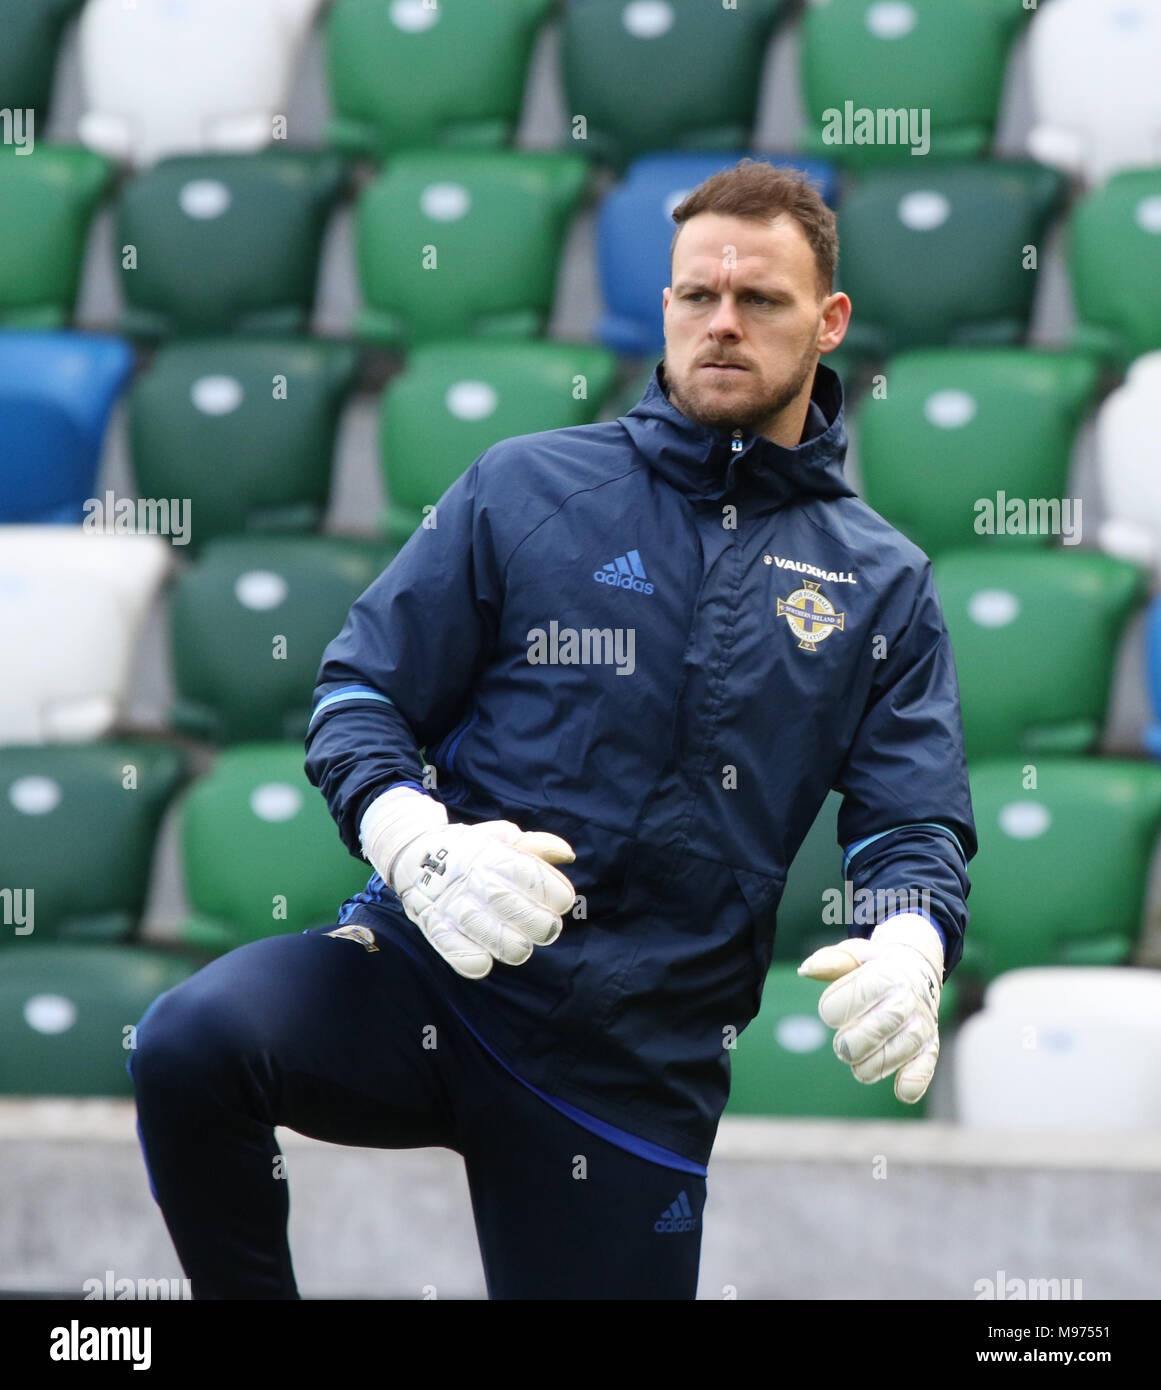 National Football Stadium at Windsor Park, Belfast, Northern Ireland. 23 March 2018. Northern Ireland training ahead of tomorrow afternoon's international friendly against the Republic of Korea (South Korea) in Belfast. Goalkeeper Trevor Carson warms up.  Credit: David Hunter/Alamy Live News. Stock Photo